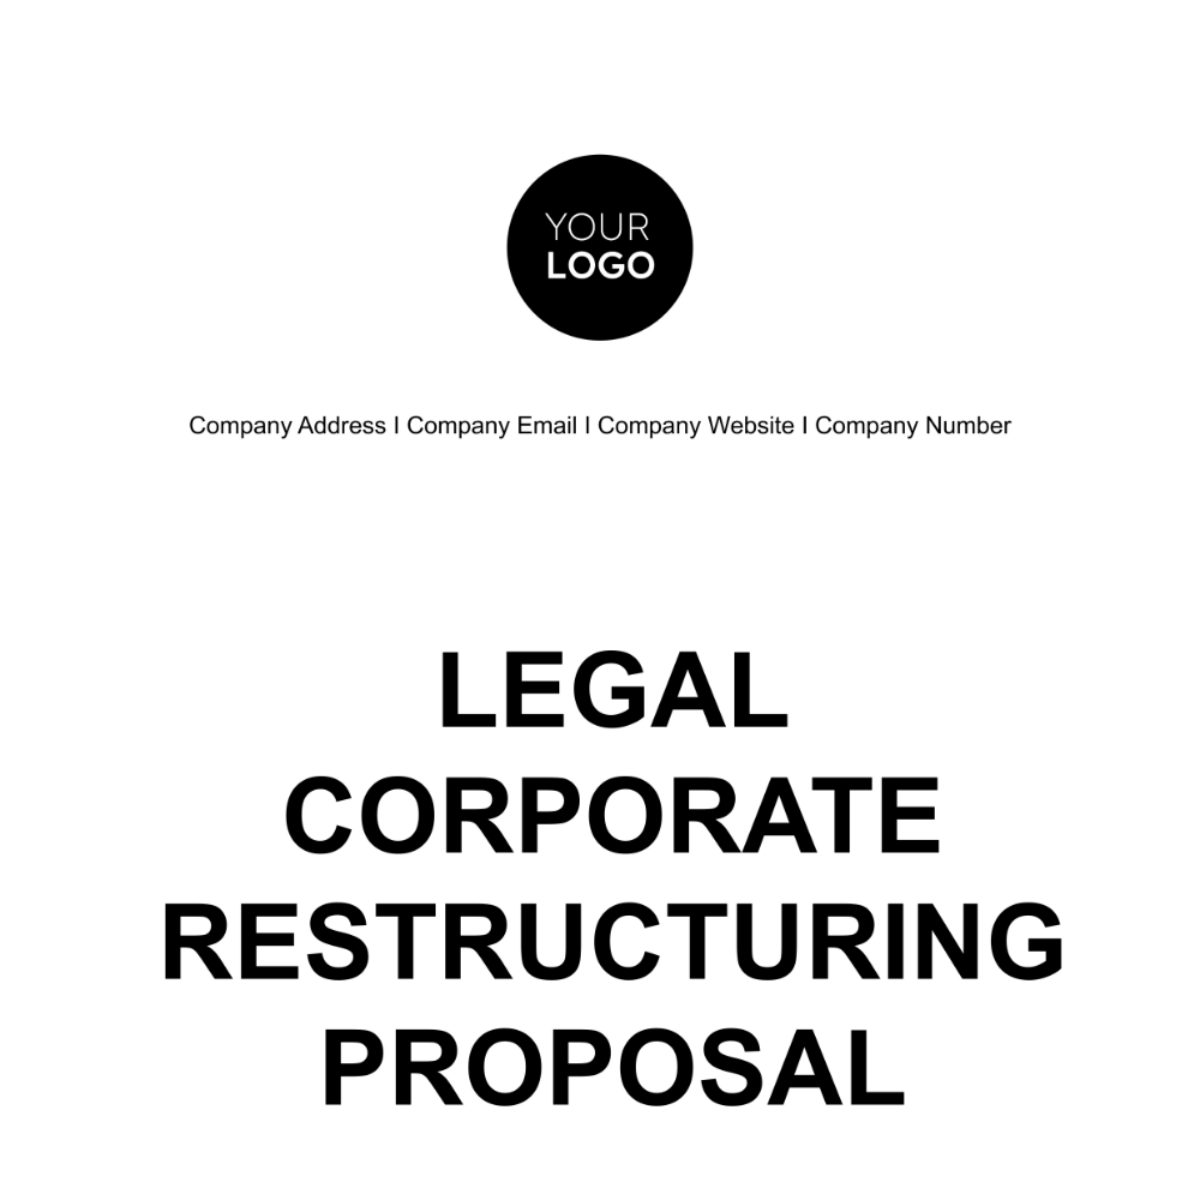 Free Legal Corporate Restructuring Proposal Template